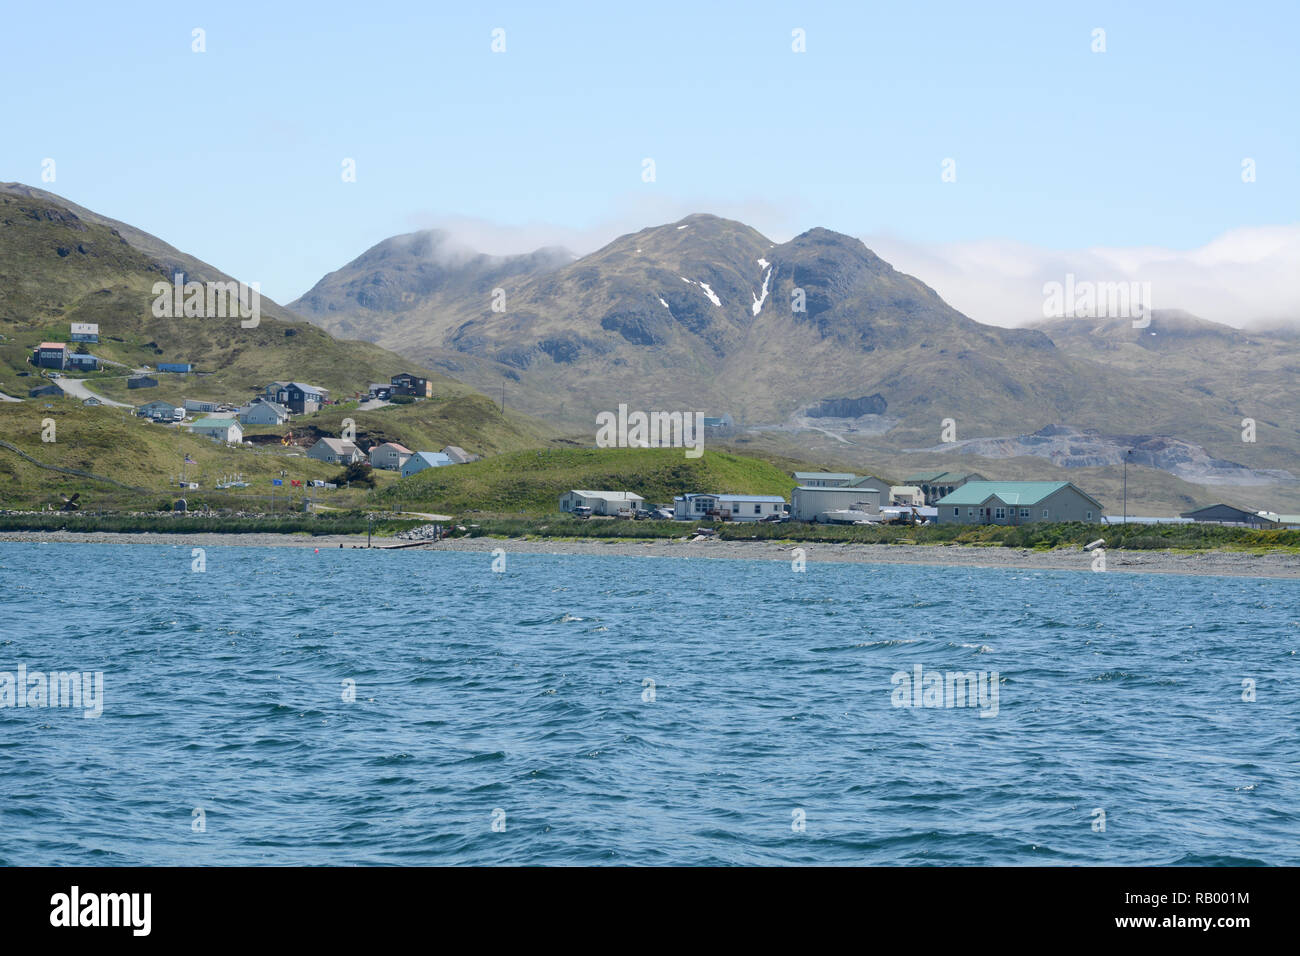 Homes on the edge of Unalaska, also known as Dutch Harbor, surrounded by mountains and the Bering Sea, Unalaska Island, Aleutian archipelago, Alaska. Stock Photo